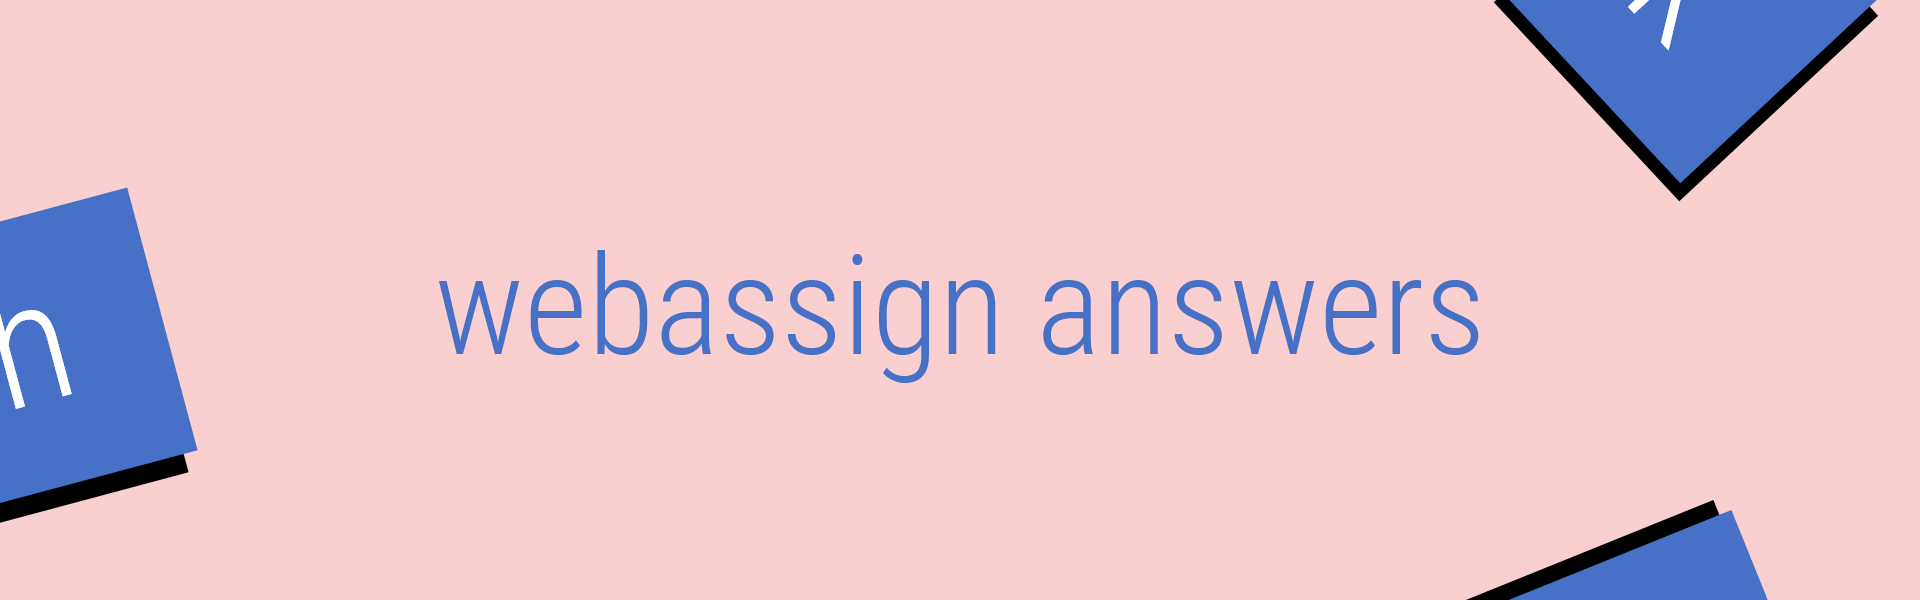 webassign answers